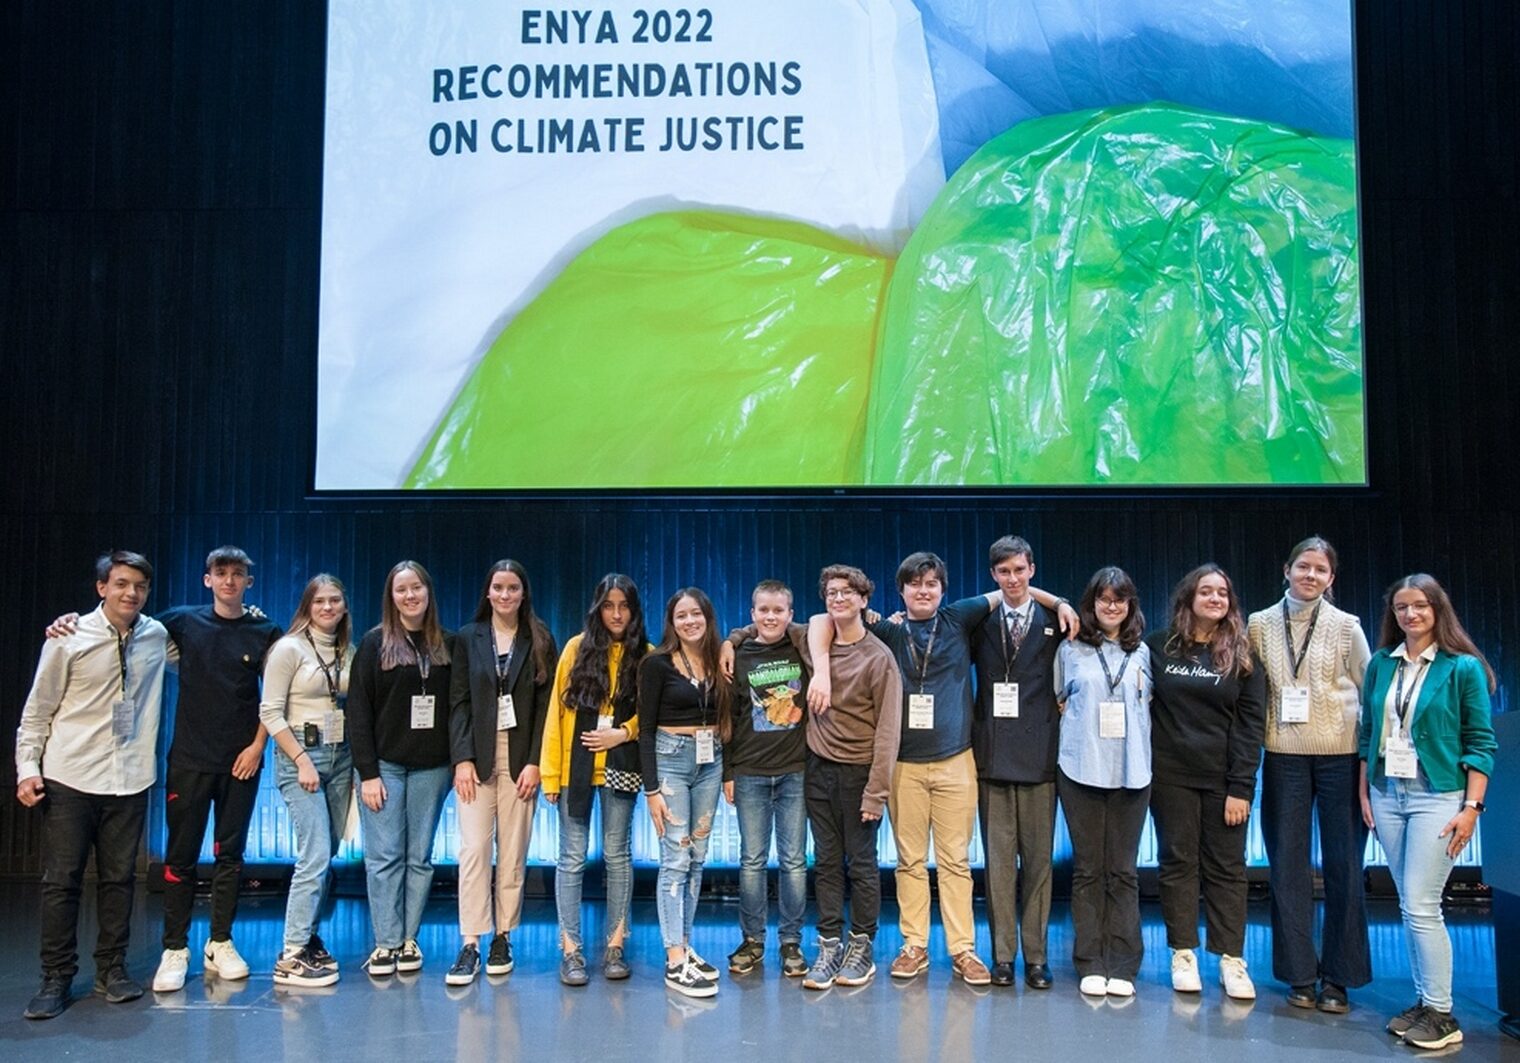 ENYA Young People at ENOC 26th Annual Conference, Reykjavik 2022